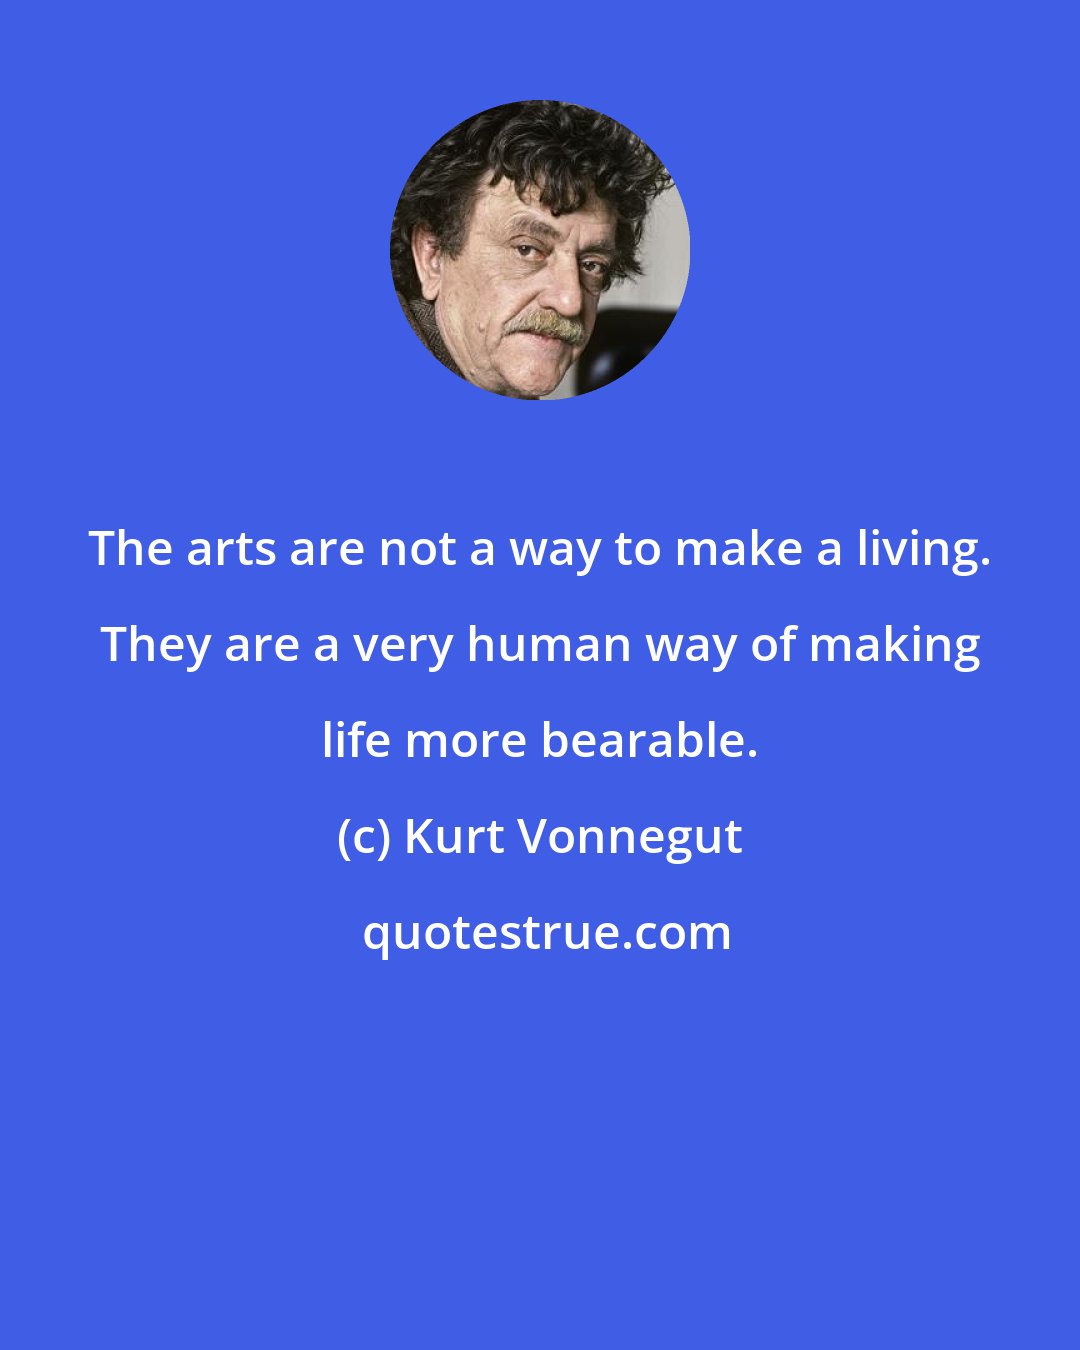 Kurt Vonnegut: The arts are not a way to make a living. They are a very human way of making life more bearable.